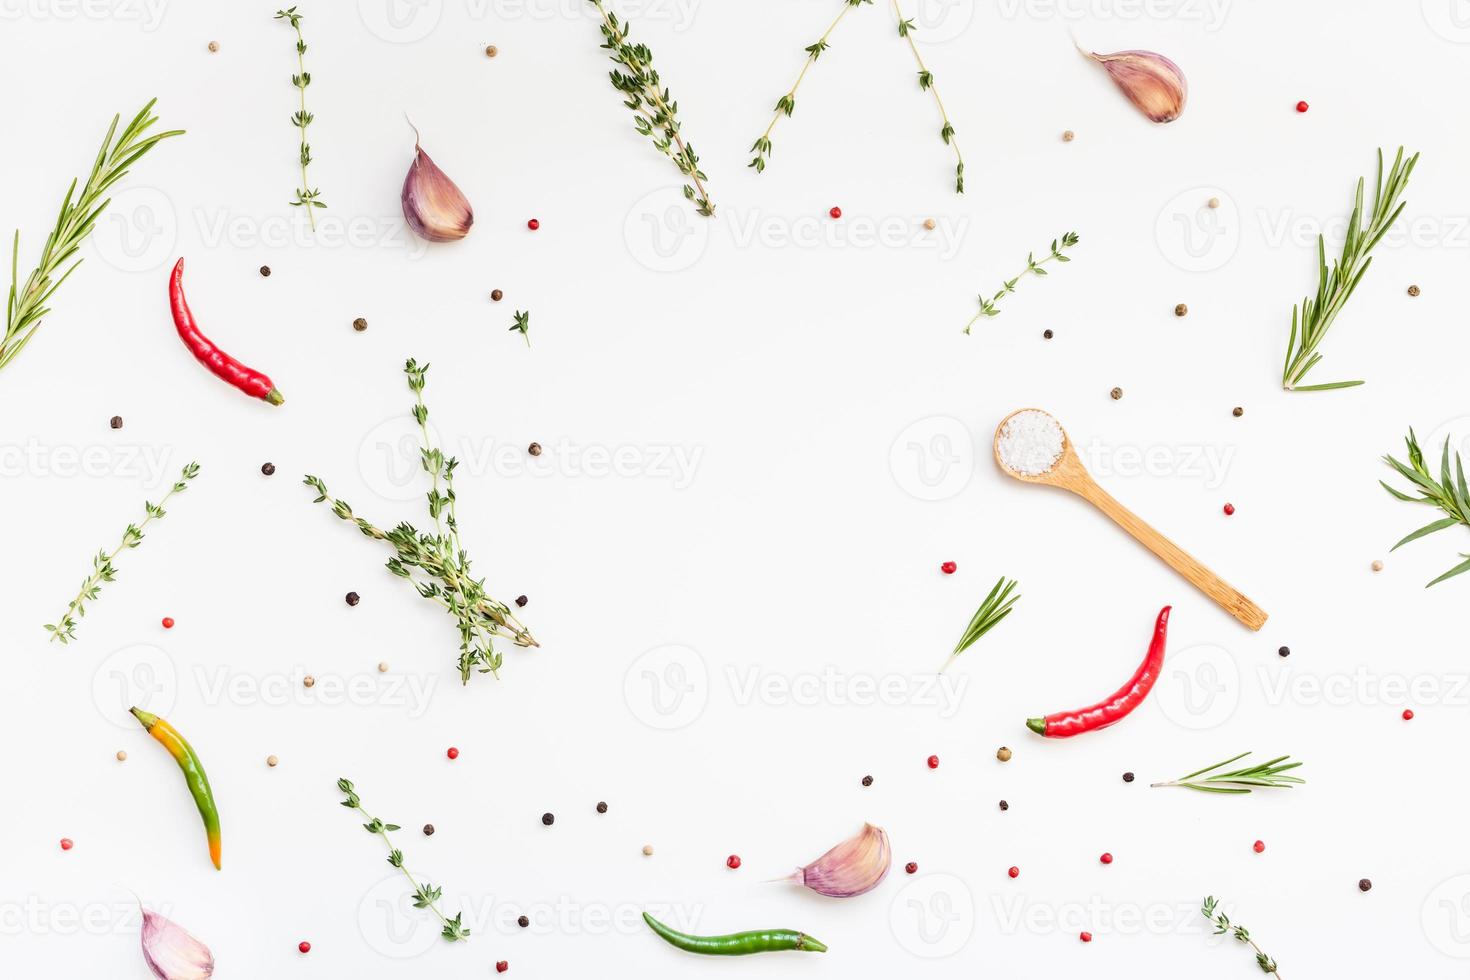 Food background with greens herbs and spices photo